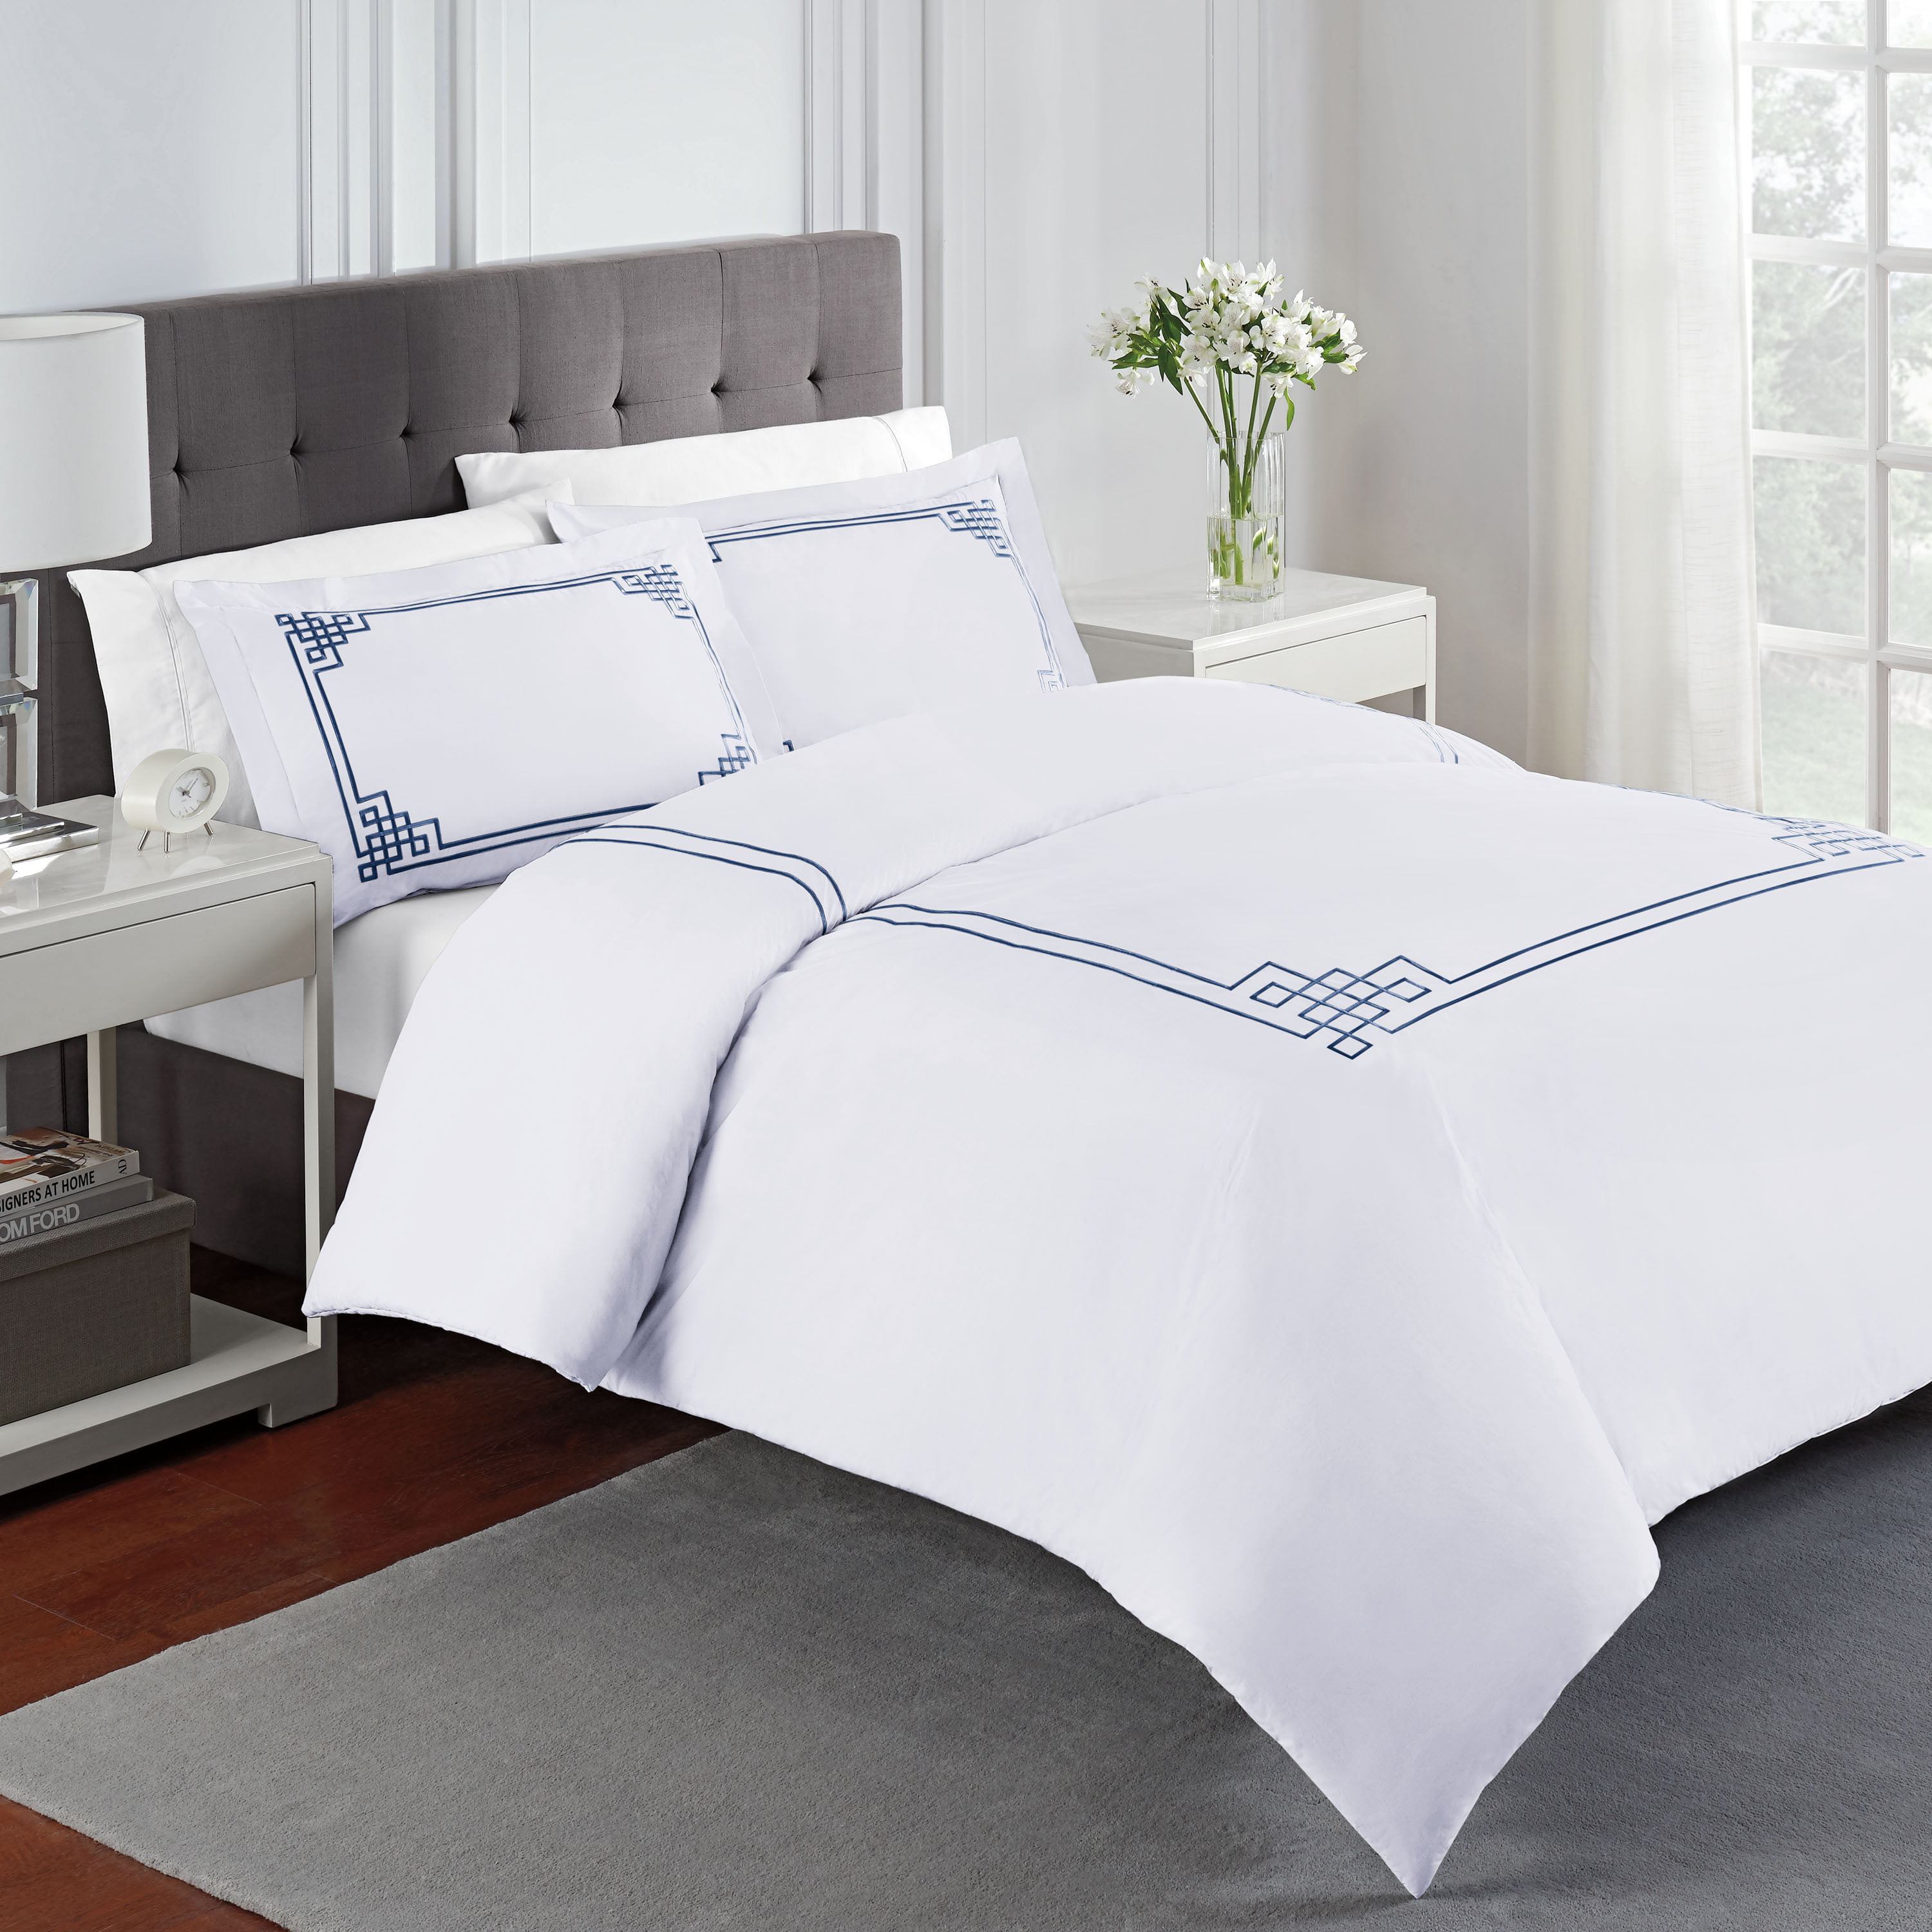 Martex Solid Percale Embroidered Full/Queen White Comforter Set